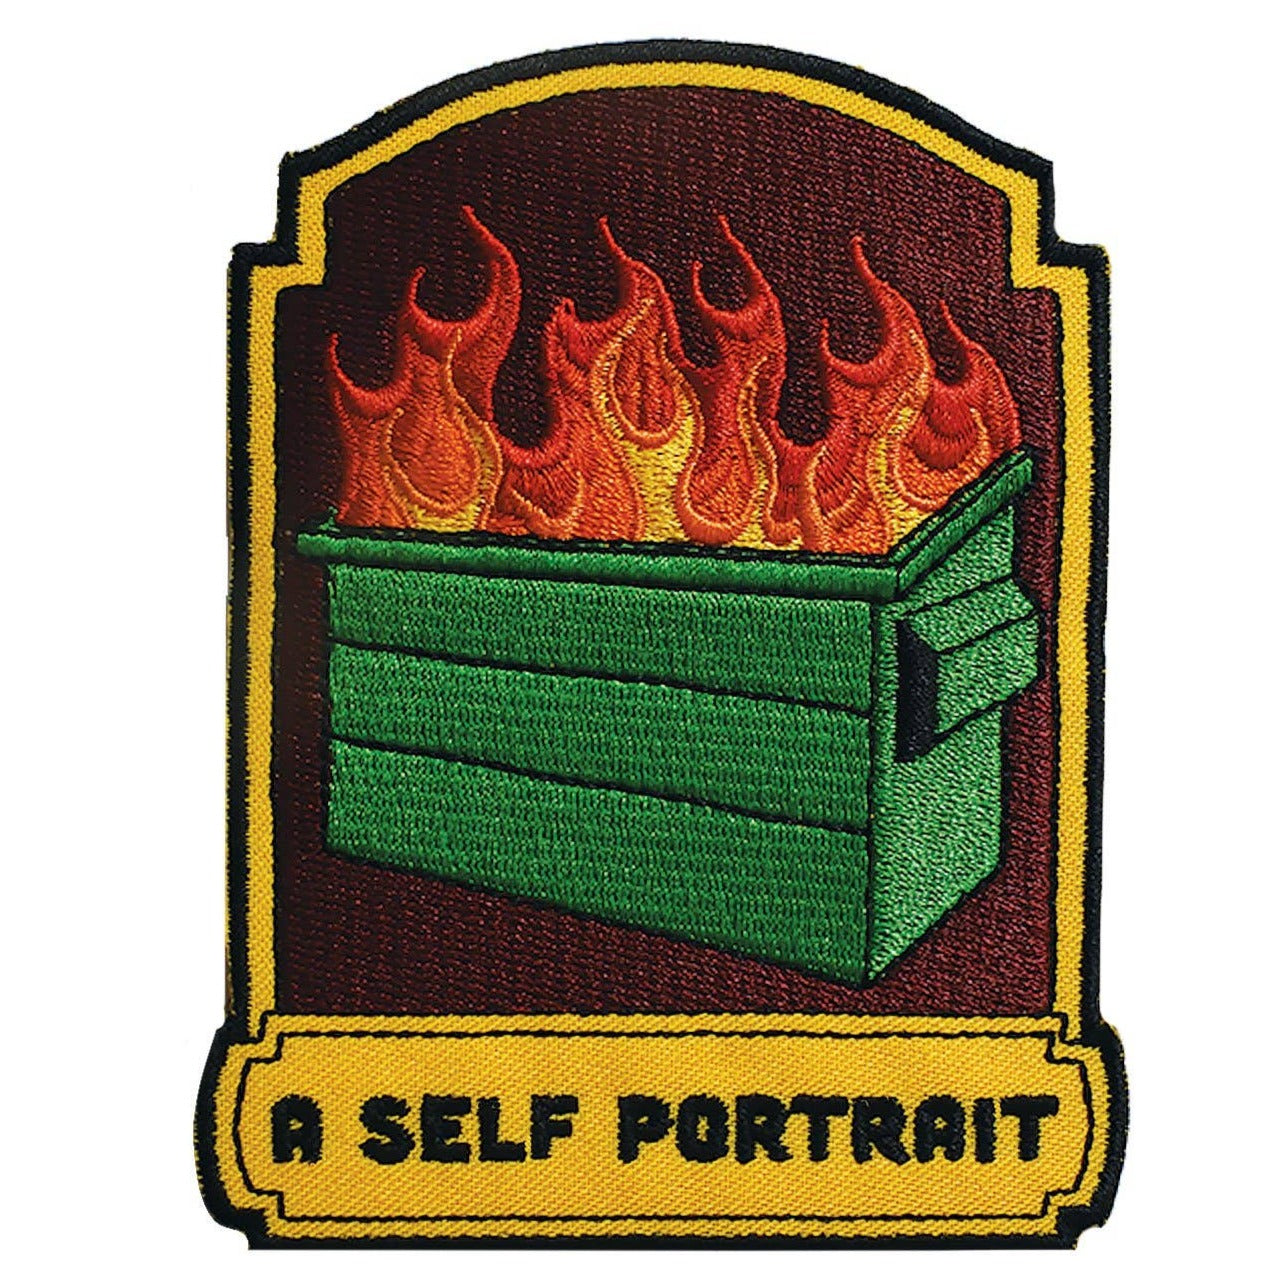 A Self Portrait Embroidered Patch